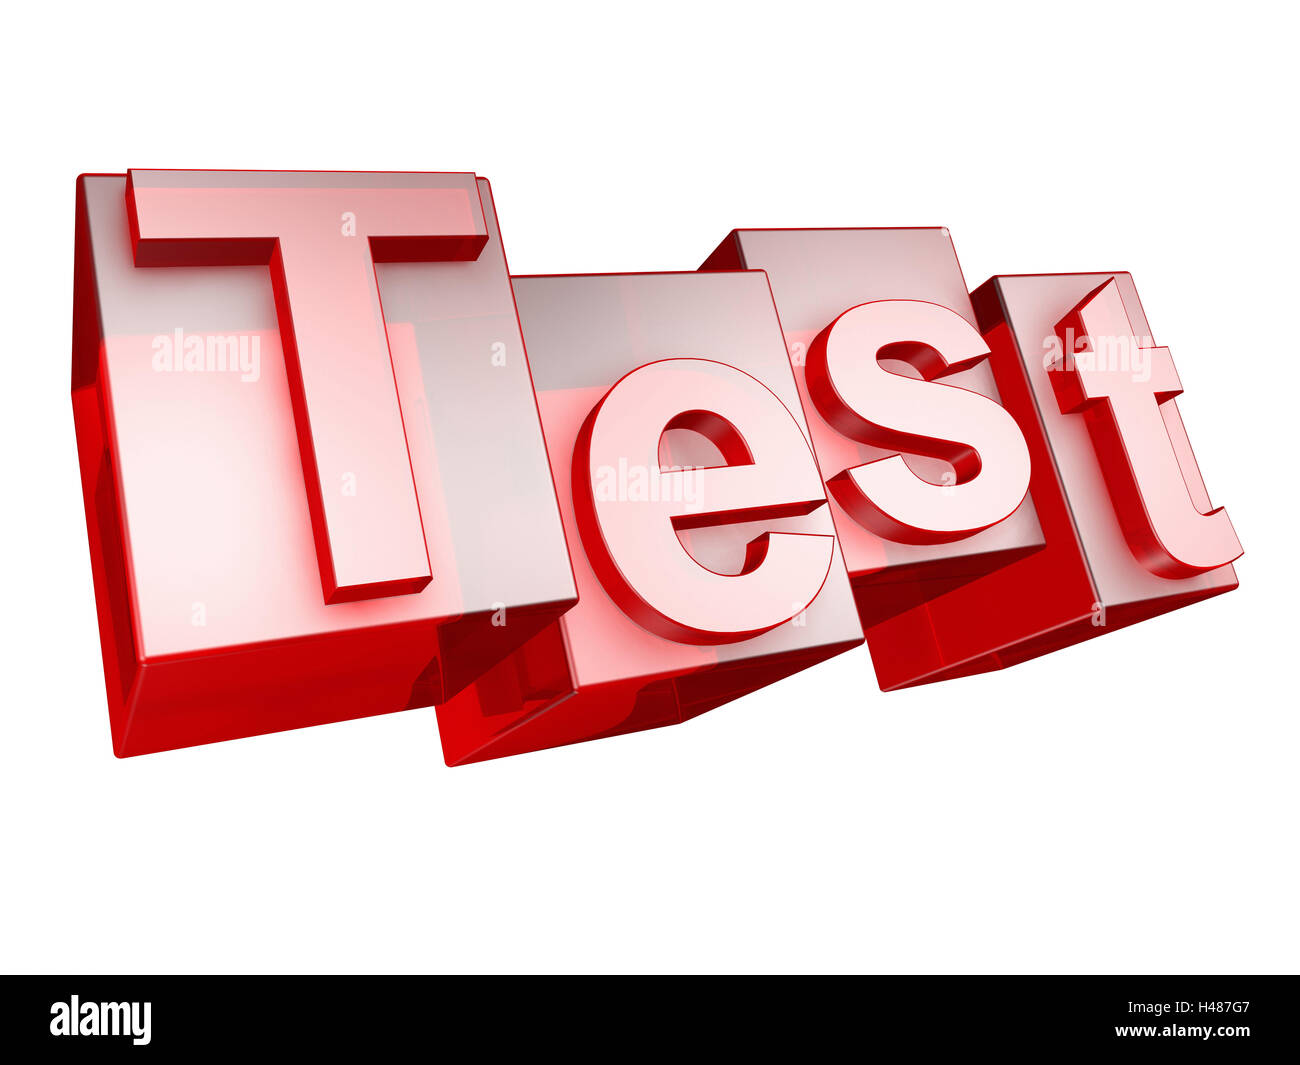 Test, red, white background, word, letters, 3-D, effect, character font, idea, conception, nobody, Frei's plate, test, Stock Photo